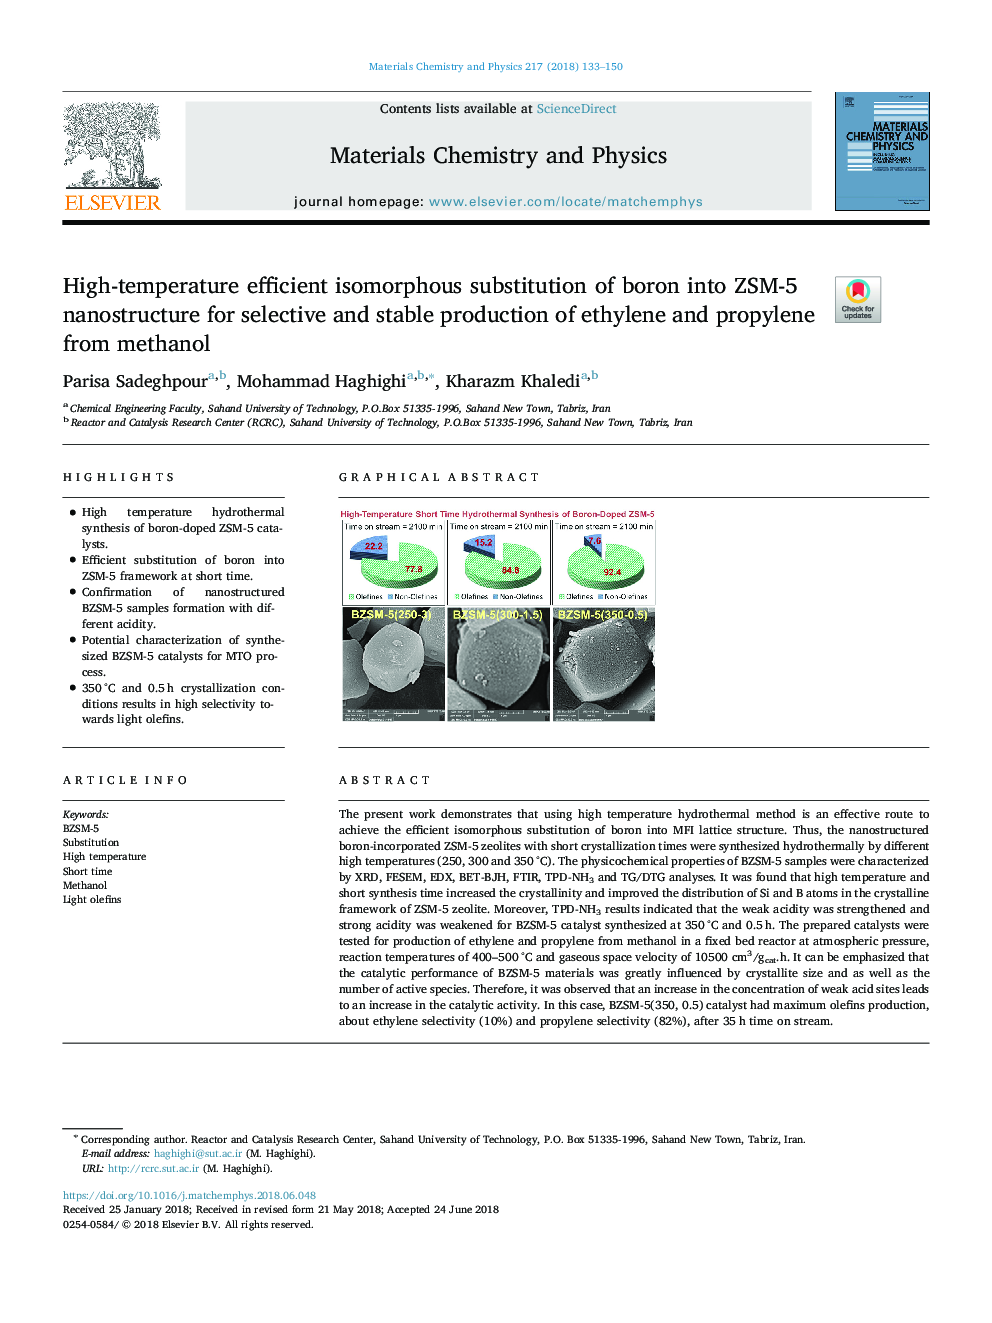 High-temperature efficient isomorphous substitution of boron into ZSM-5 nanostructure for selective and stable production of ethylene and propylene from methanol